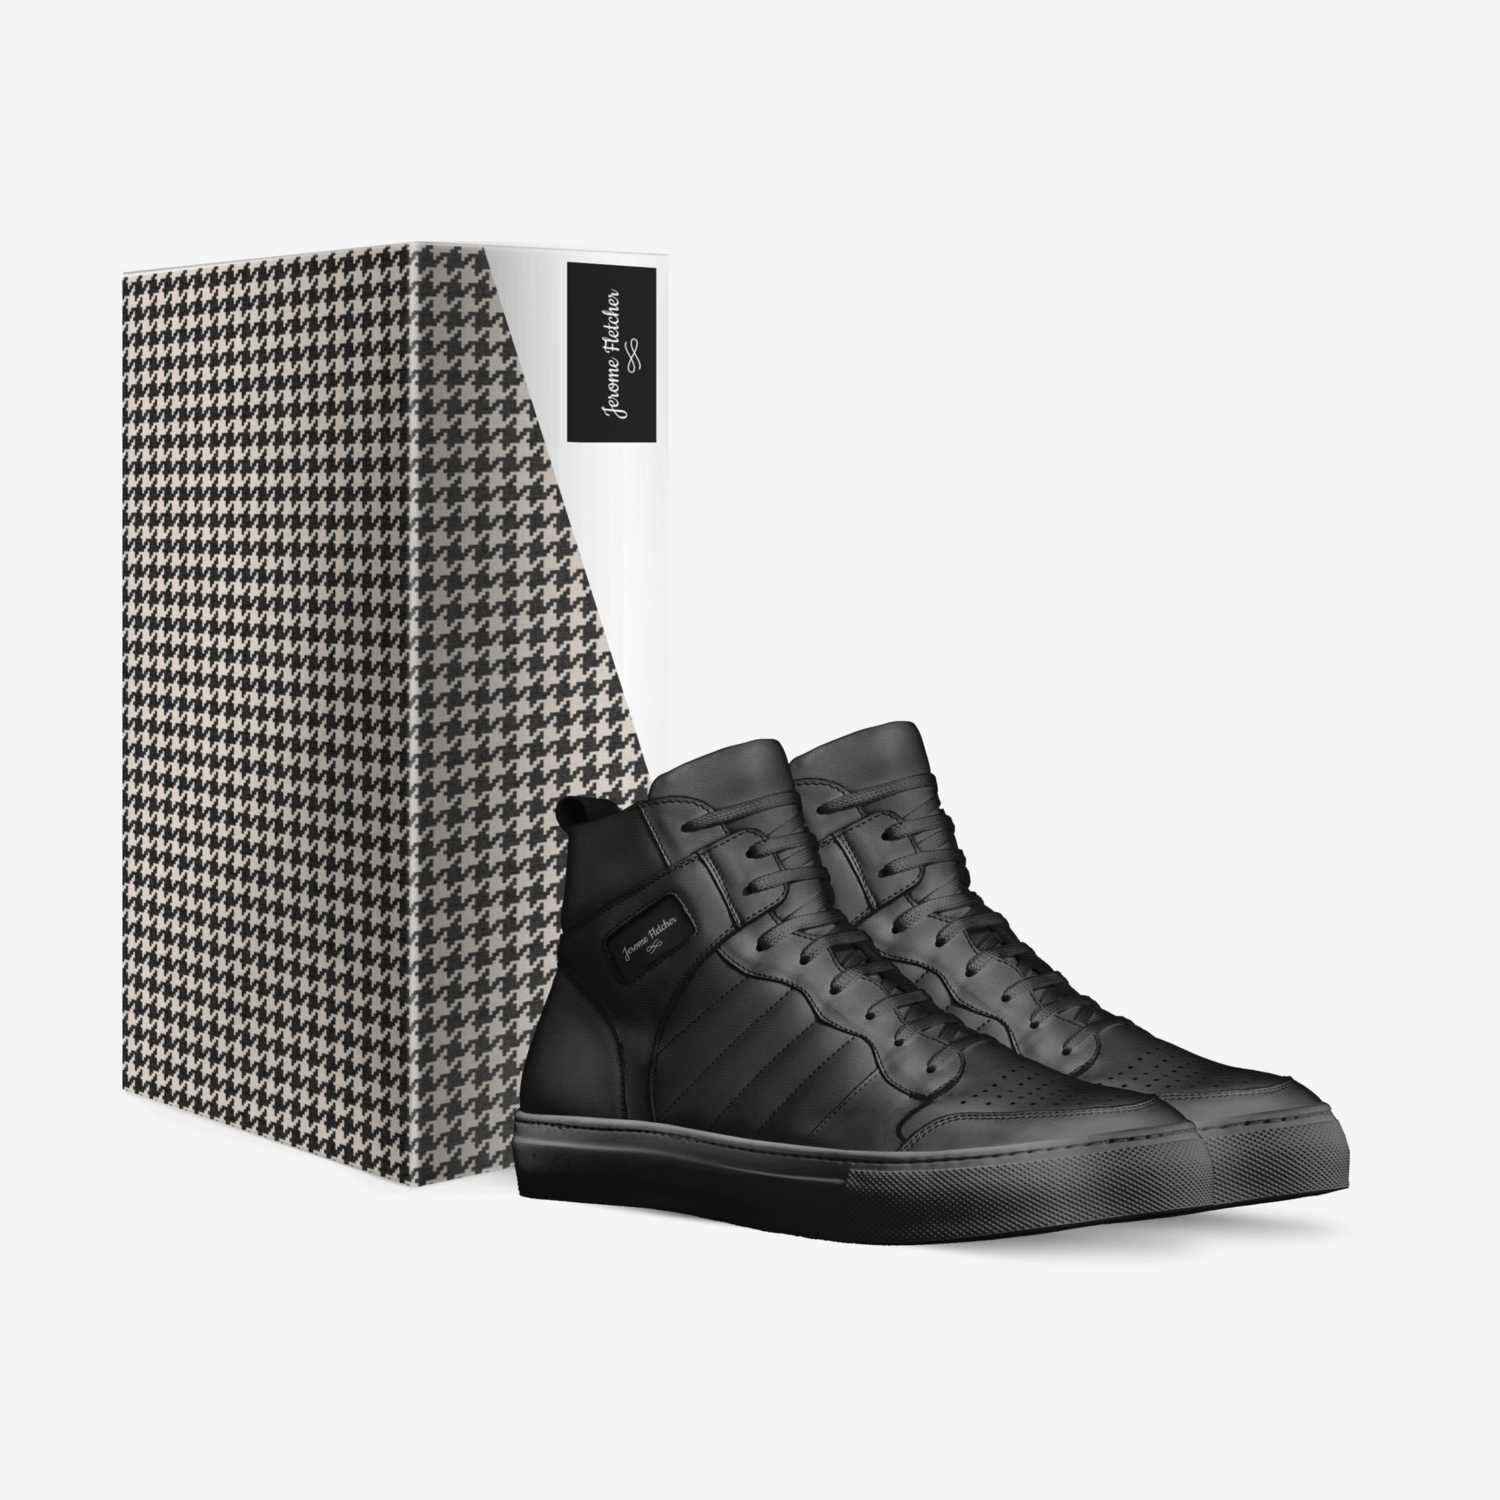 JF1 hi-top custom made in Italy shoes by Omar Fletcher | Box view